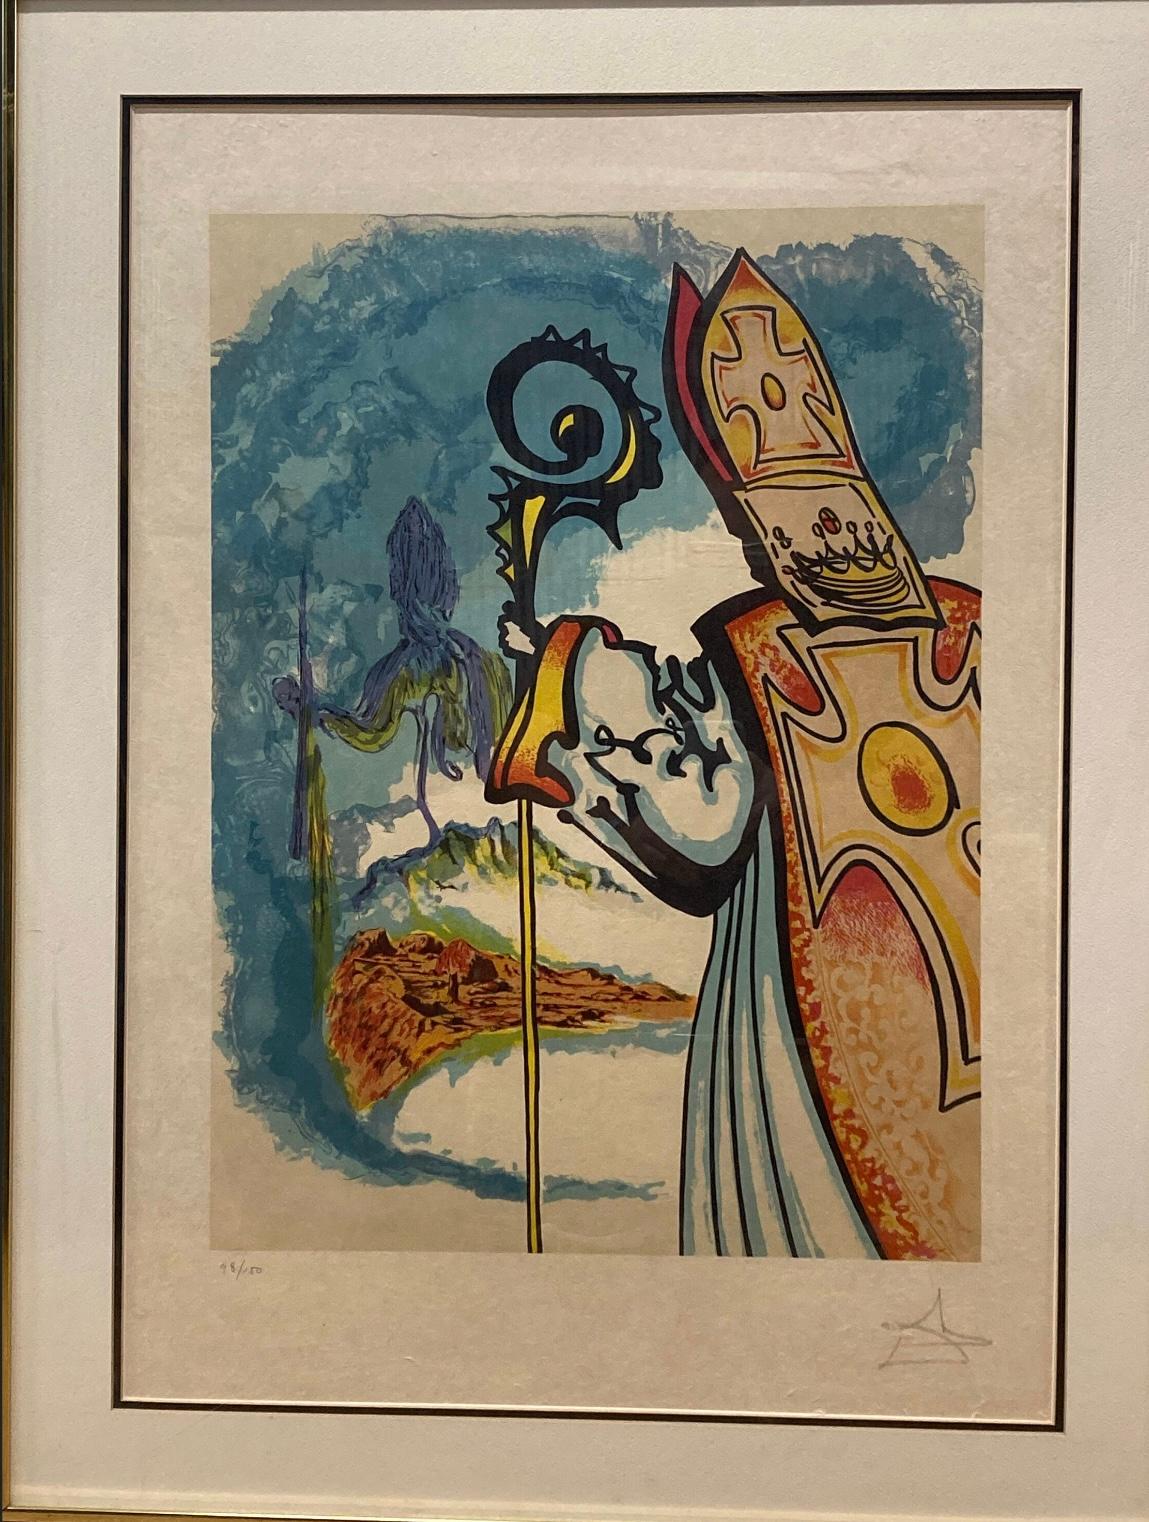 What is the style of Salvador Dalí?